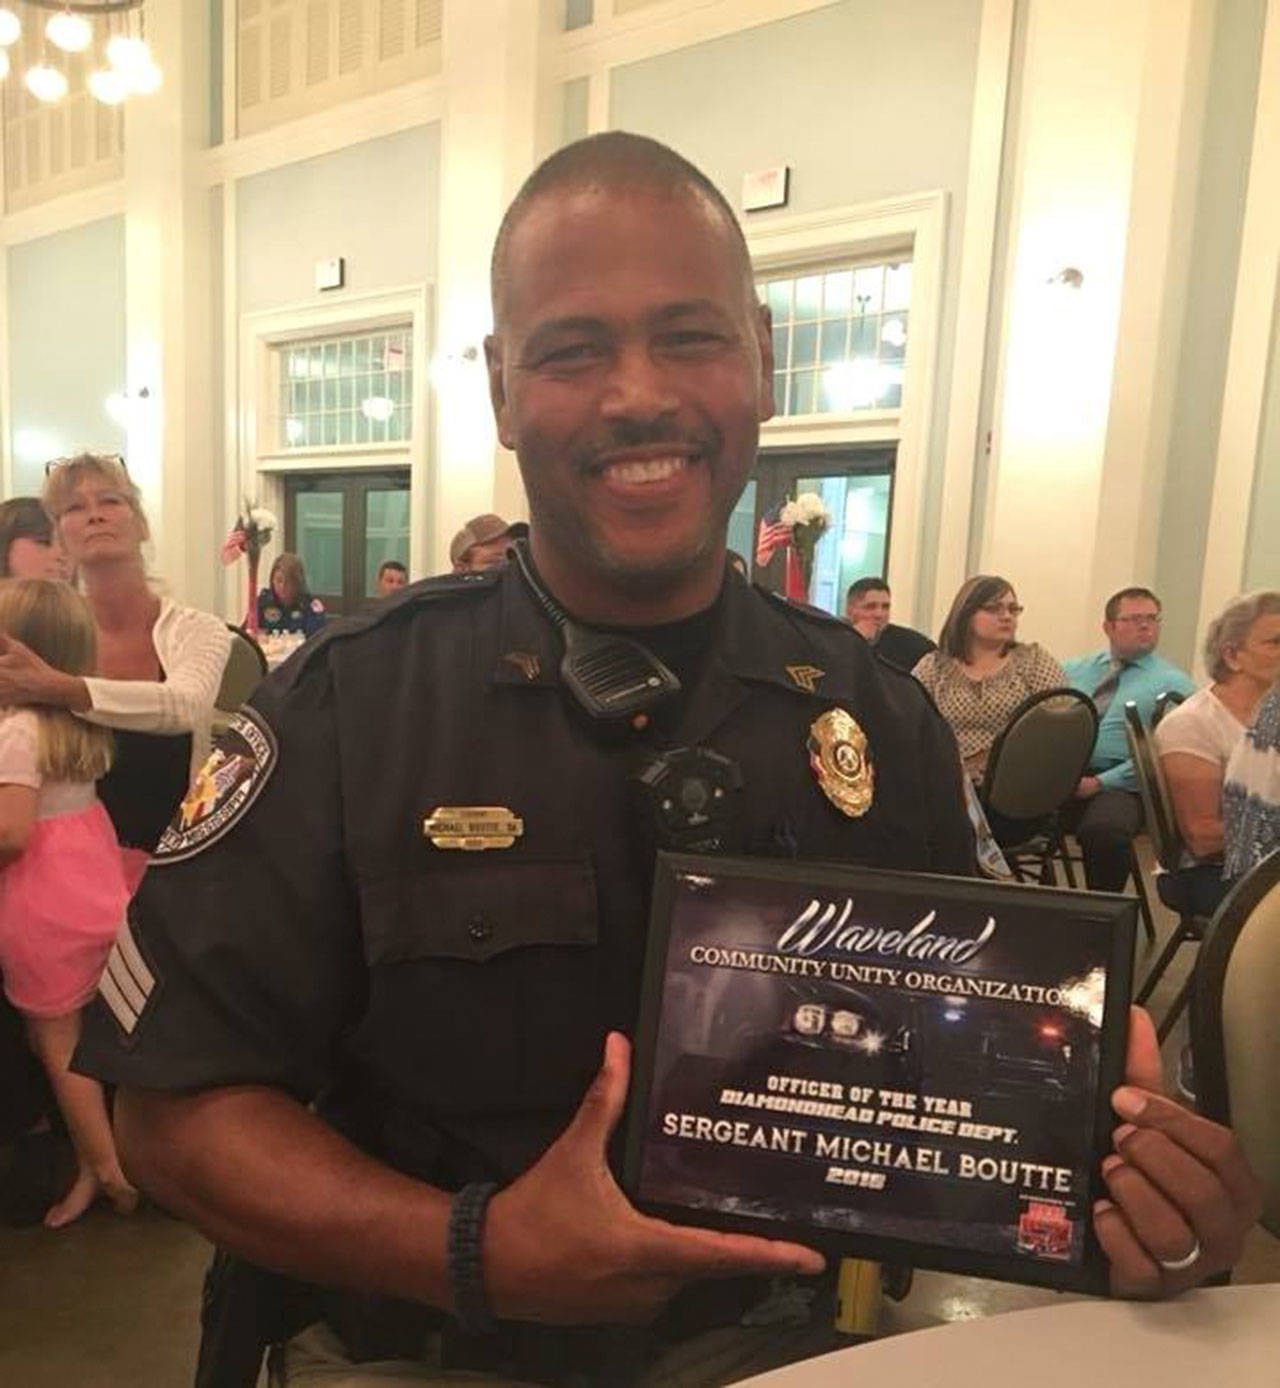 Lt. Michael Boutte pictured in June 2018. Photo courtesy of the Diamondhead Police Department